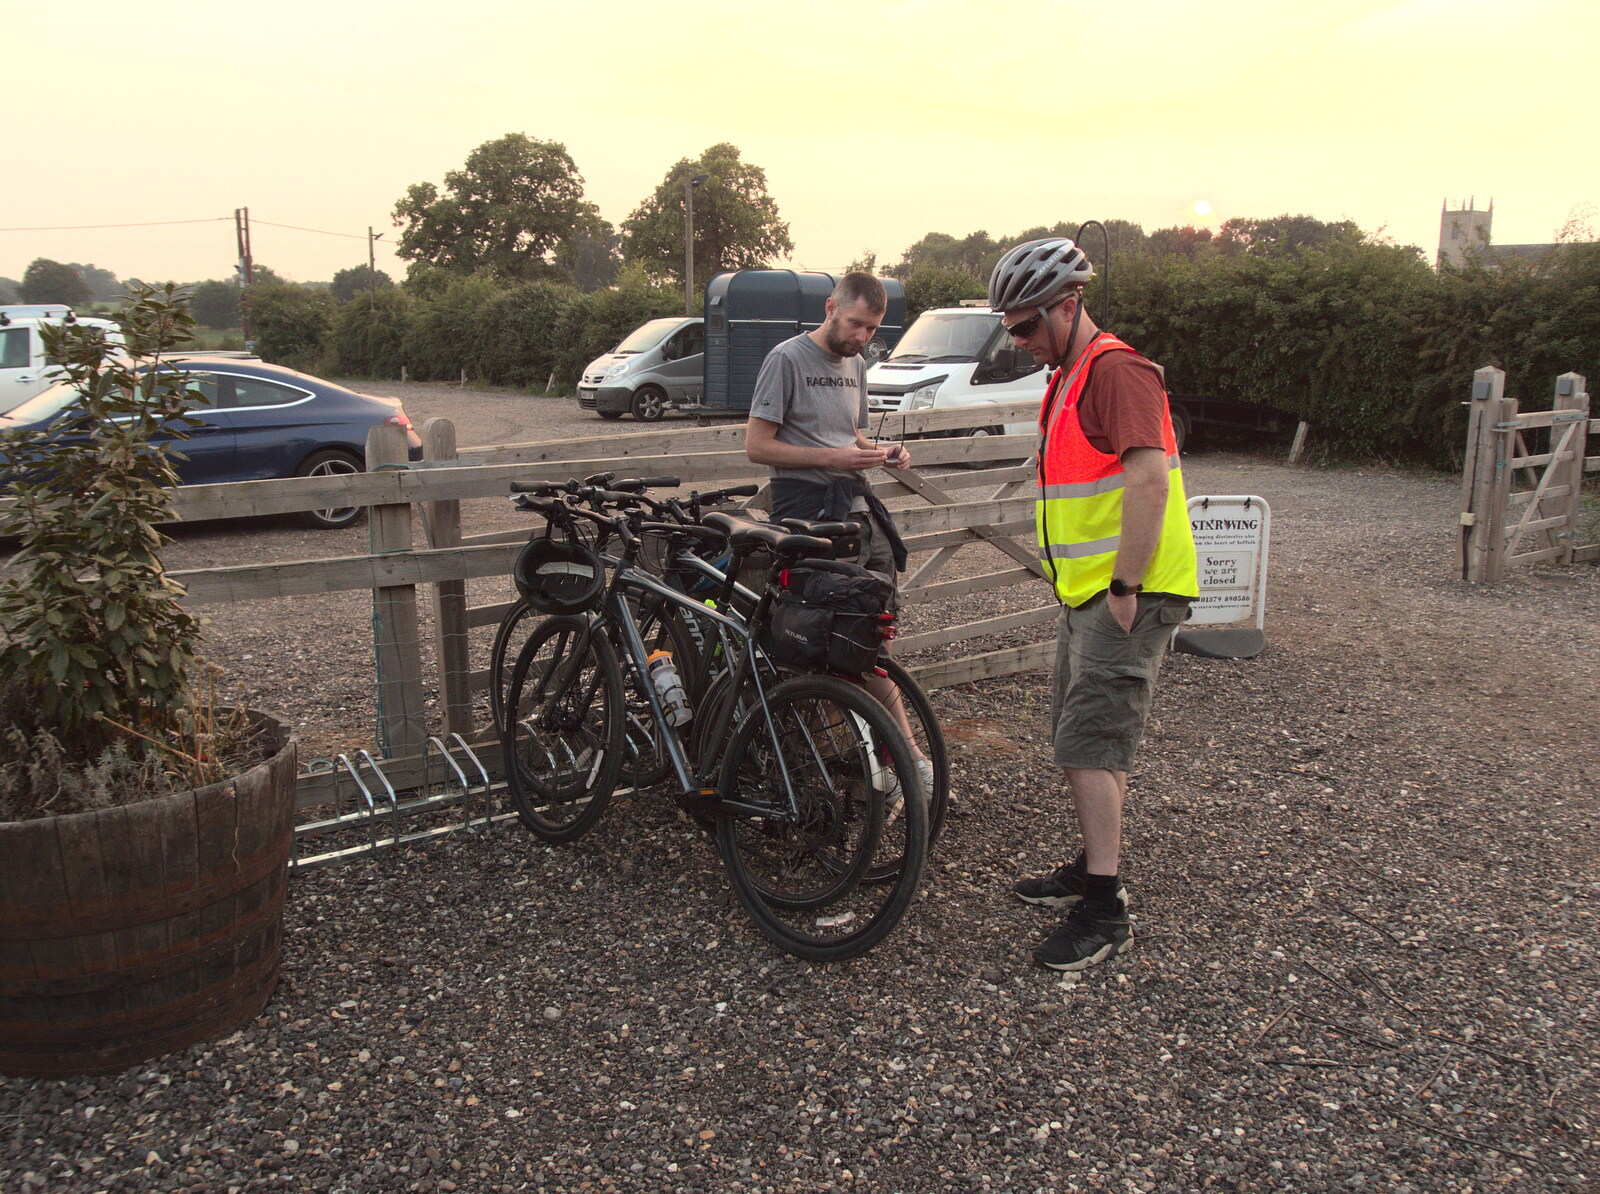 Phil and Paul get ready to ride back from Pizza at the Village Hall, Brome, Suffolk - 24th June 2022